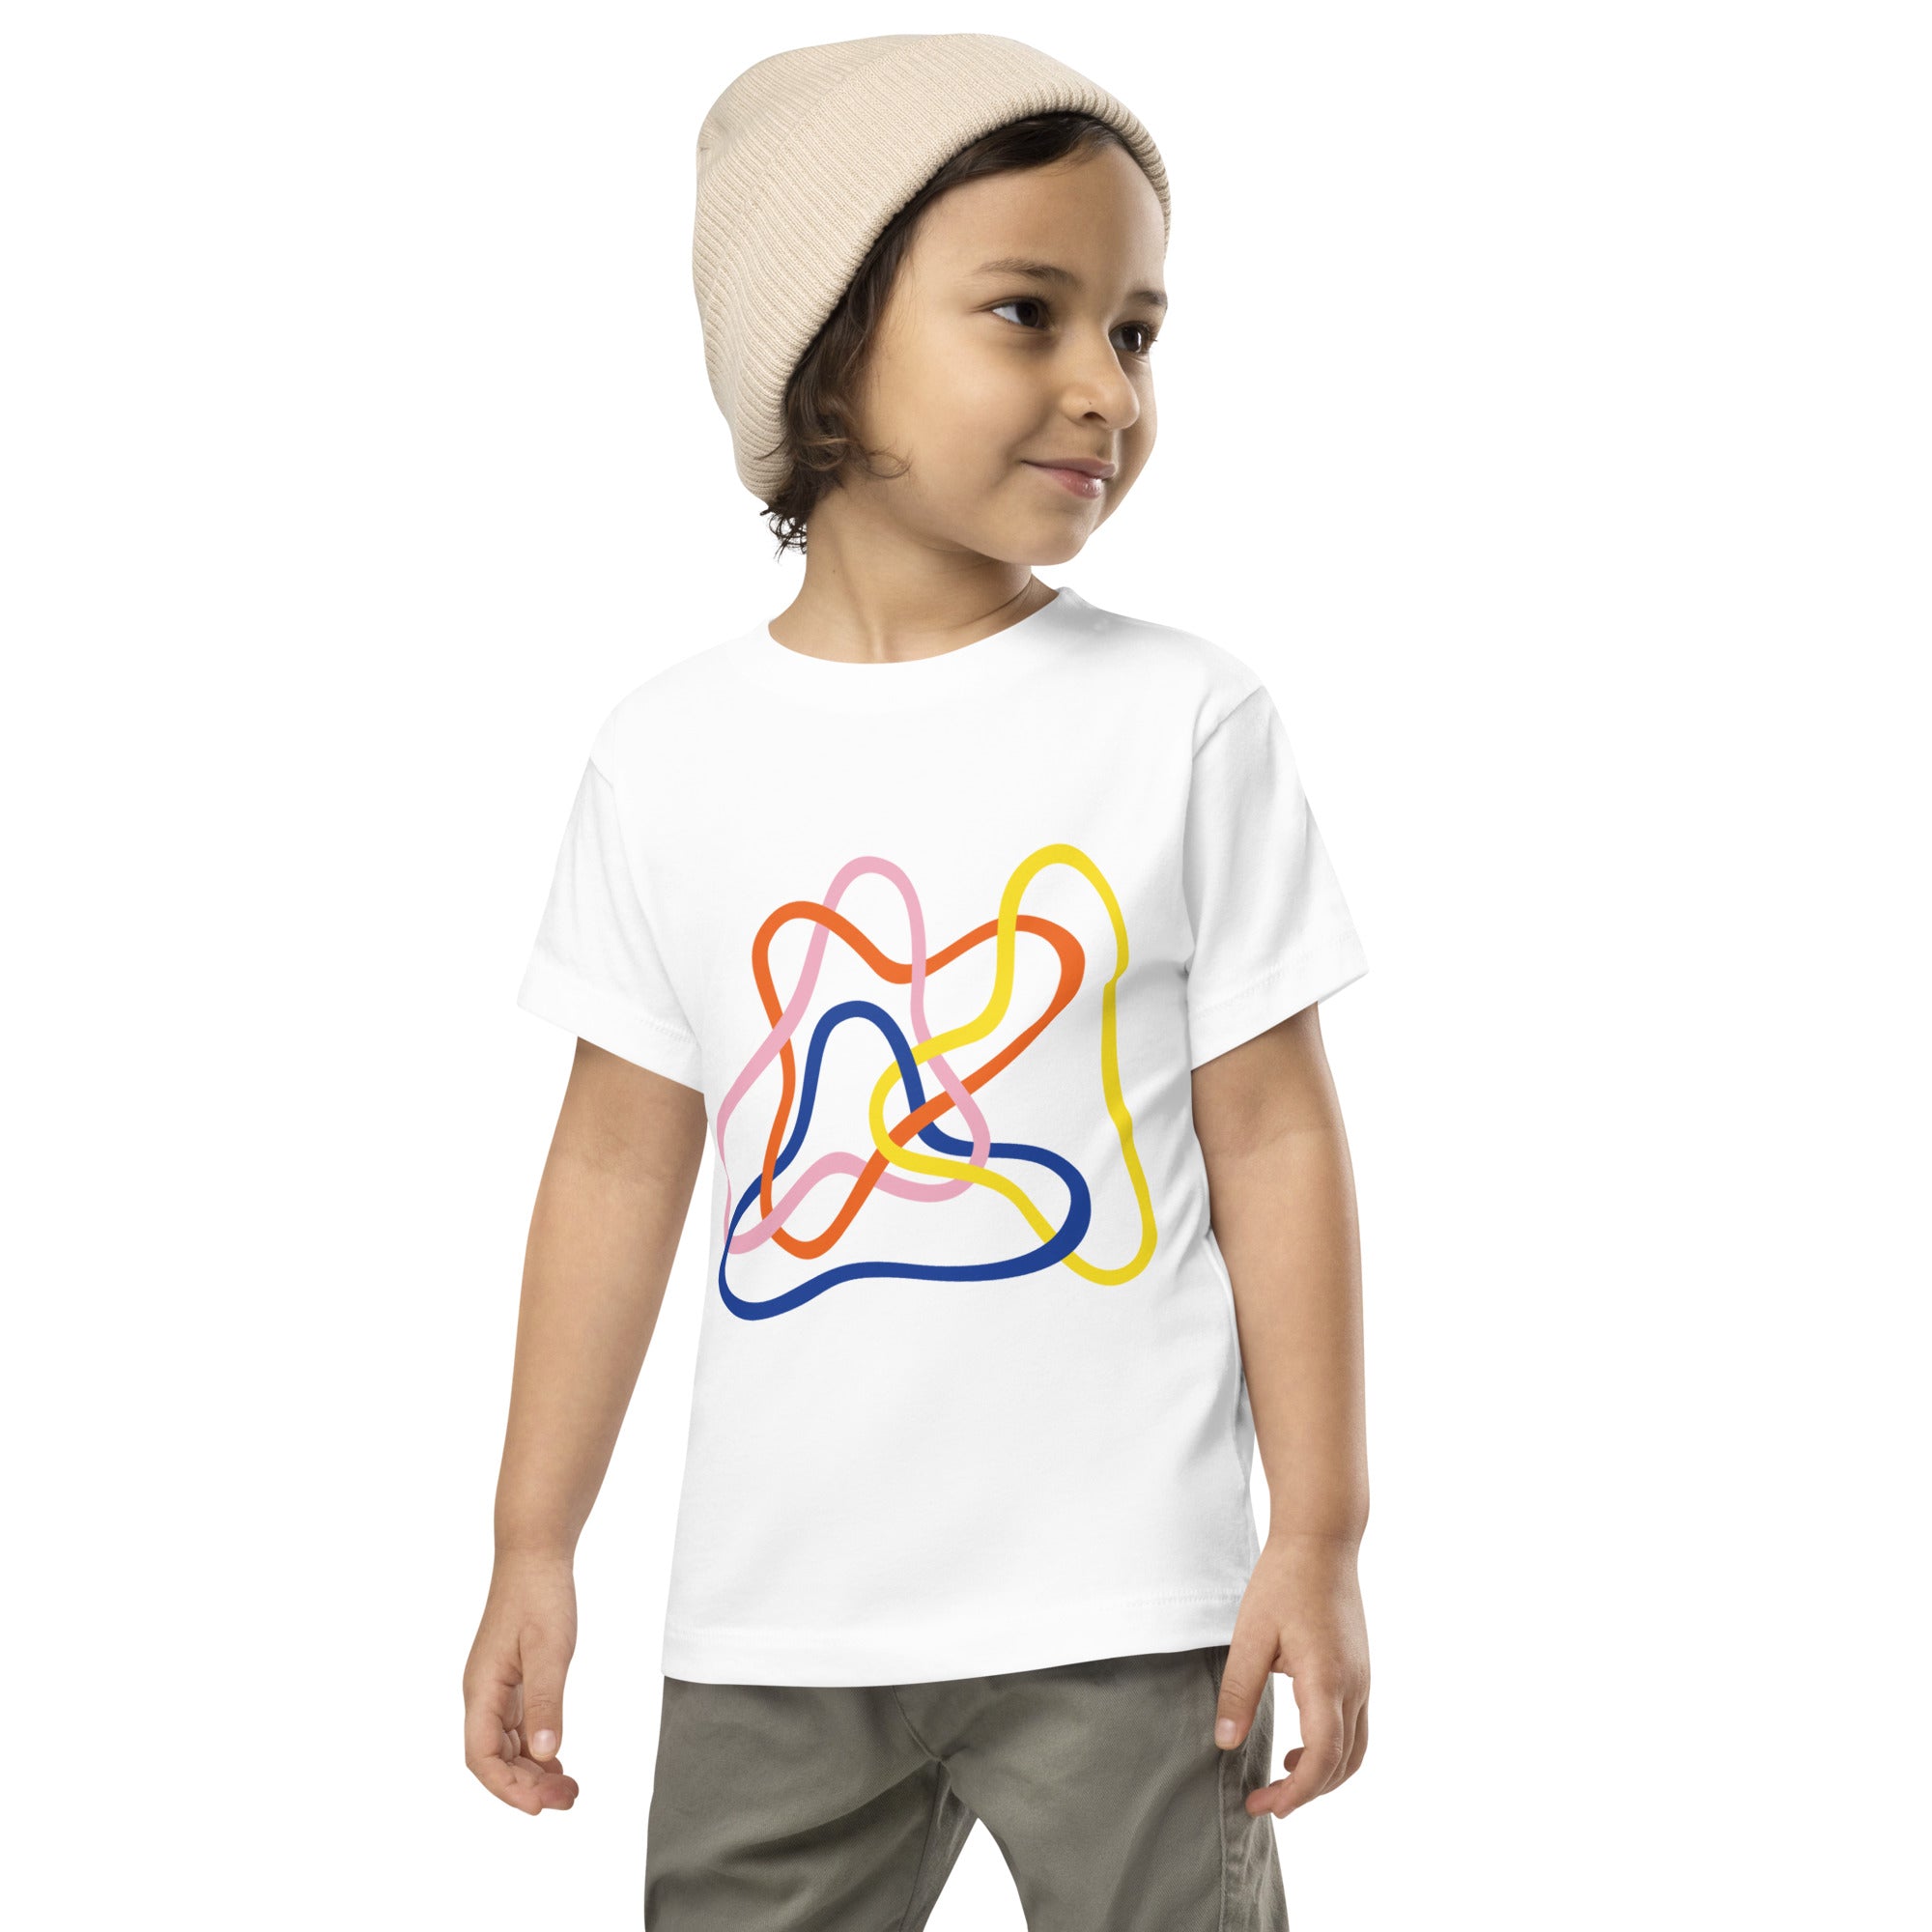 Tangled Abstract Shapes Toddler Tee